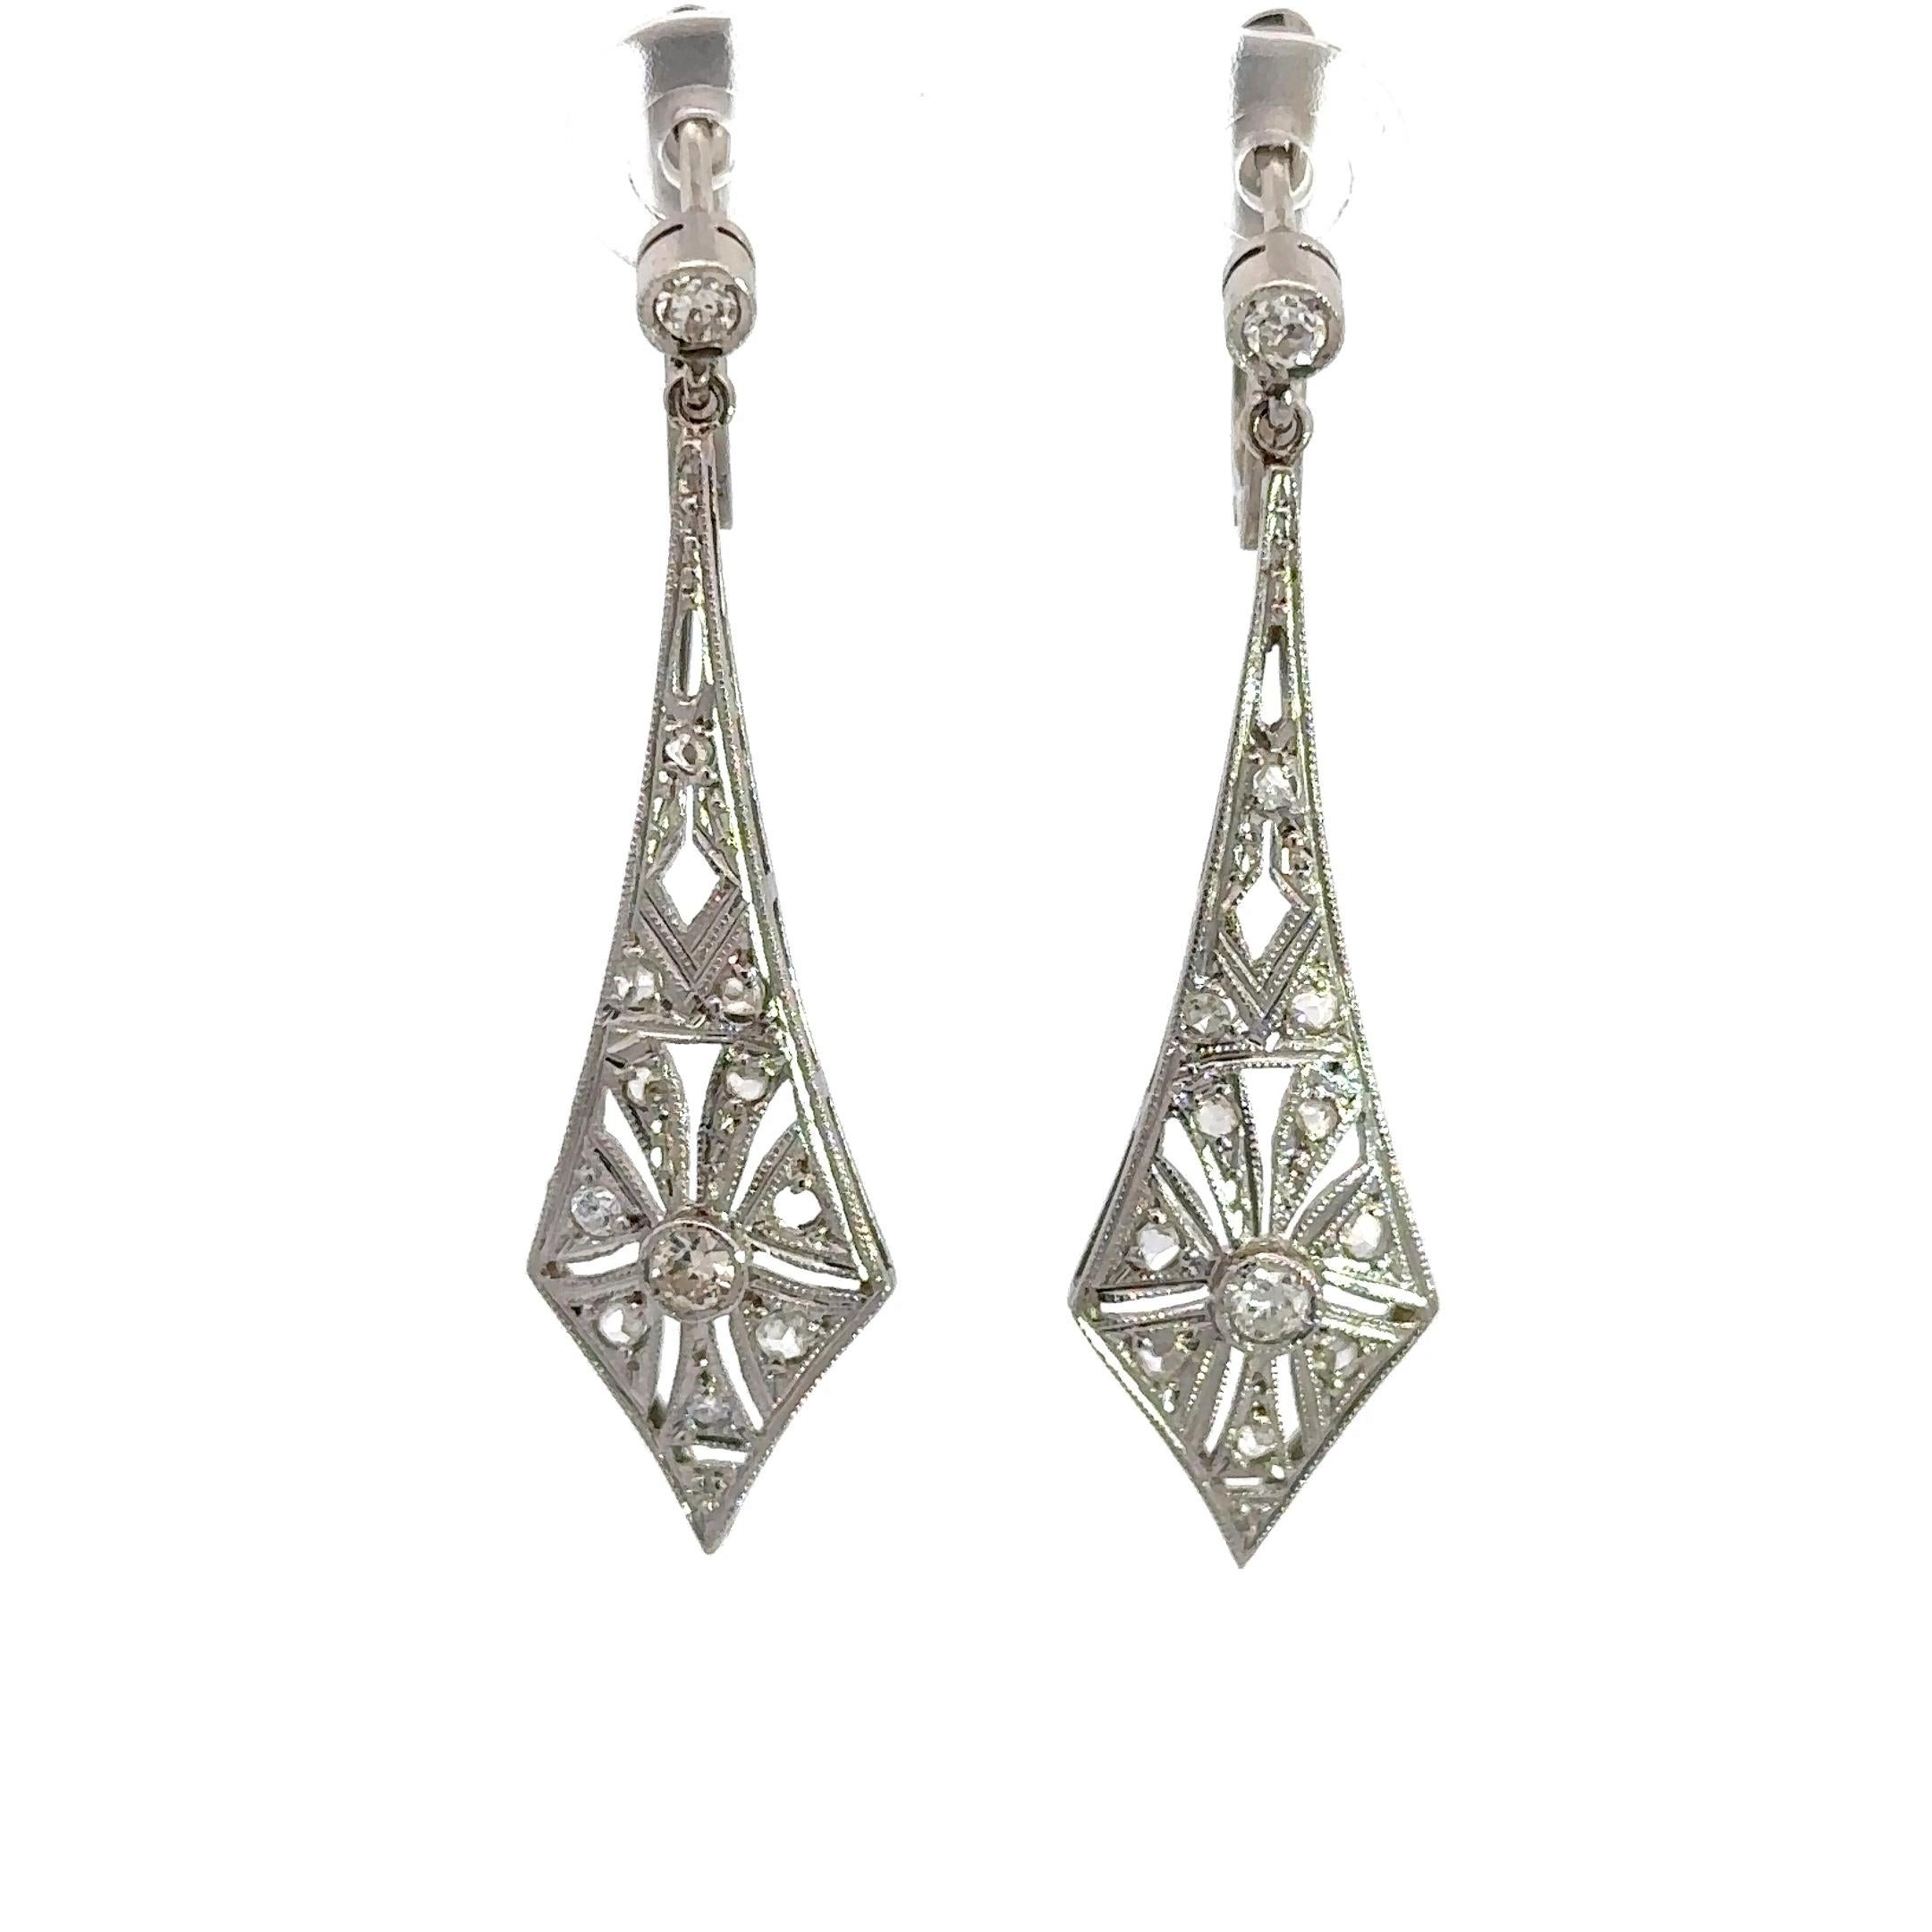 These vintage Art Deco pendulum earrings date from the 1920s. Crafted from platinum with a filigree design and approximately .75CT of rose-cut and old European cut diamonds.  The earrings measure 1.5 inches in length and weigh 5.7 grams. Why we love